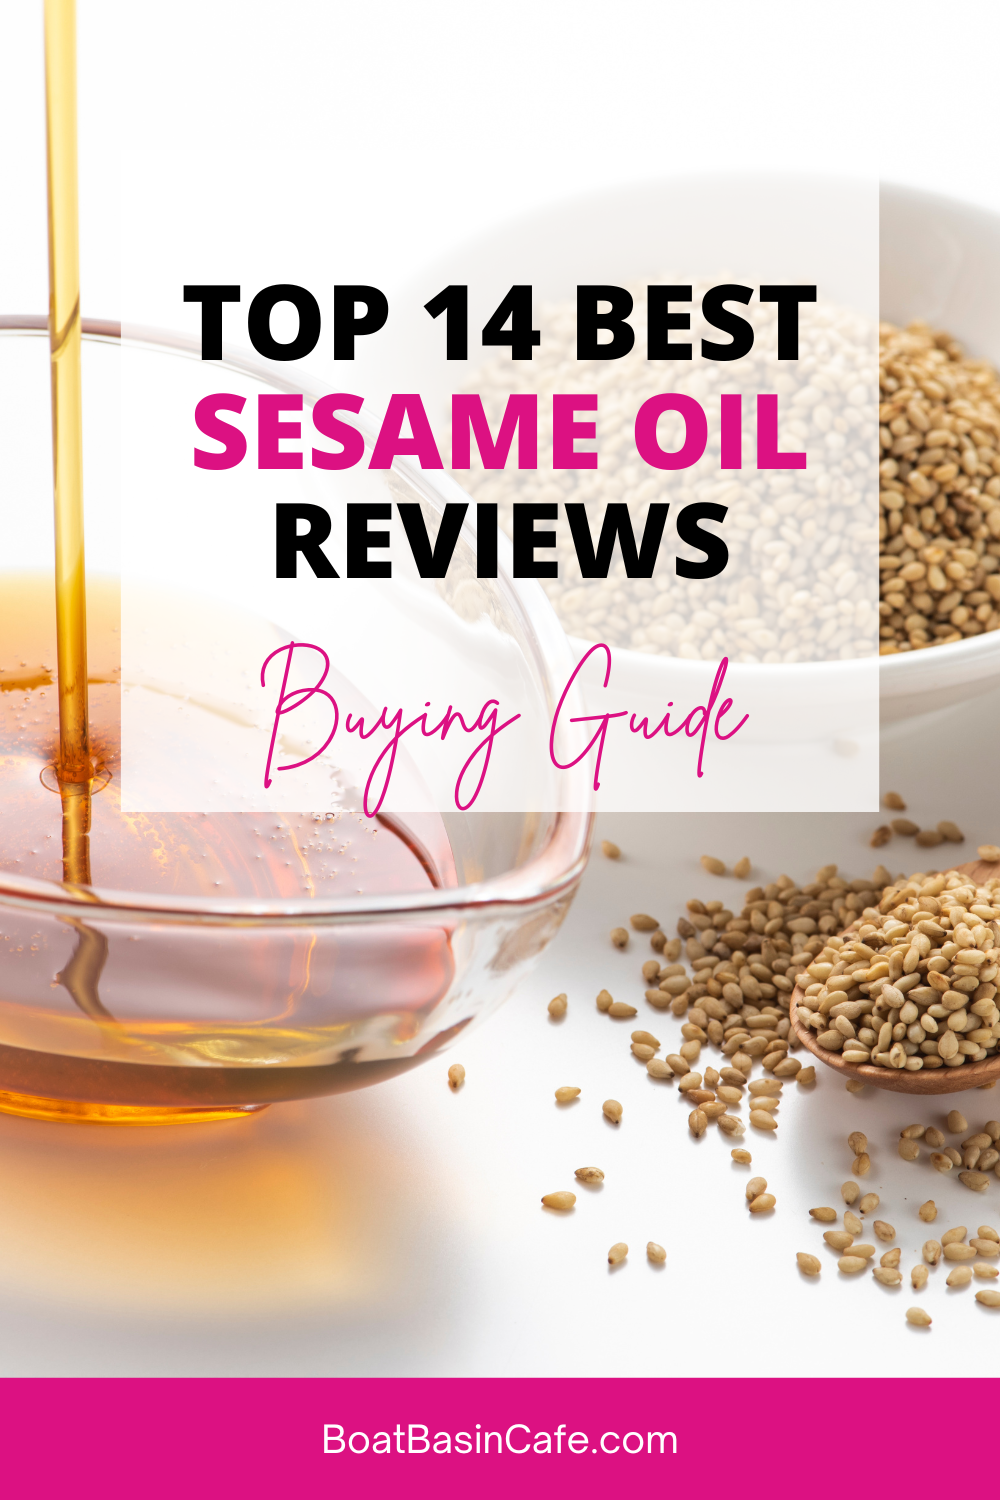 Top 14 Best Sesame Oil Reviews & Buying Guide 19